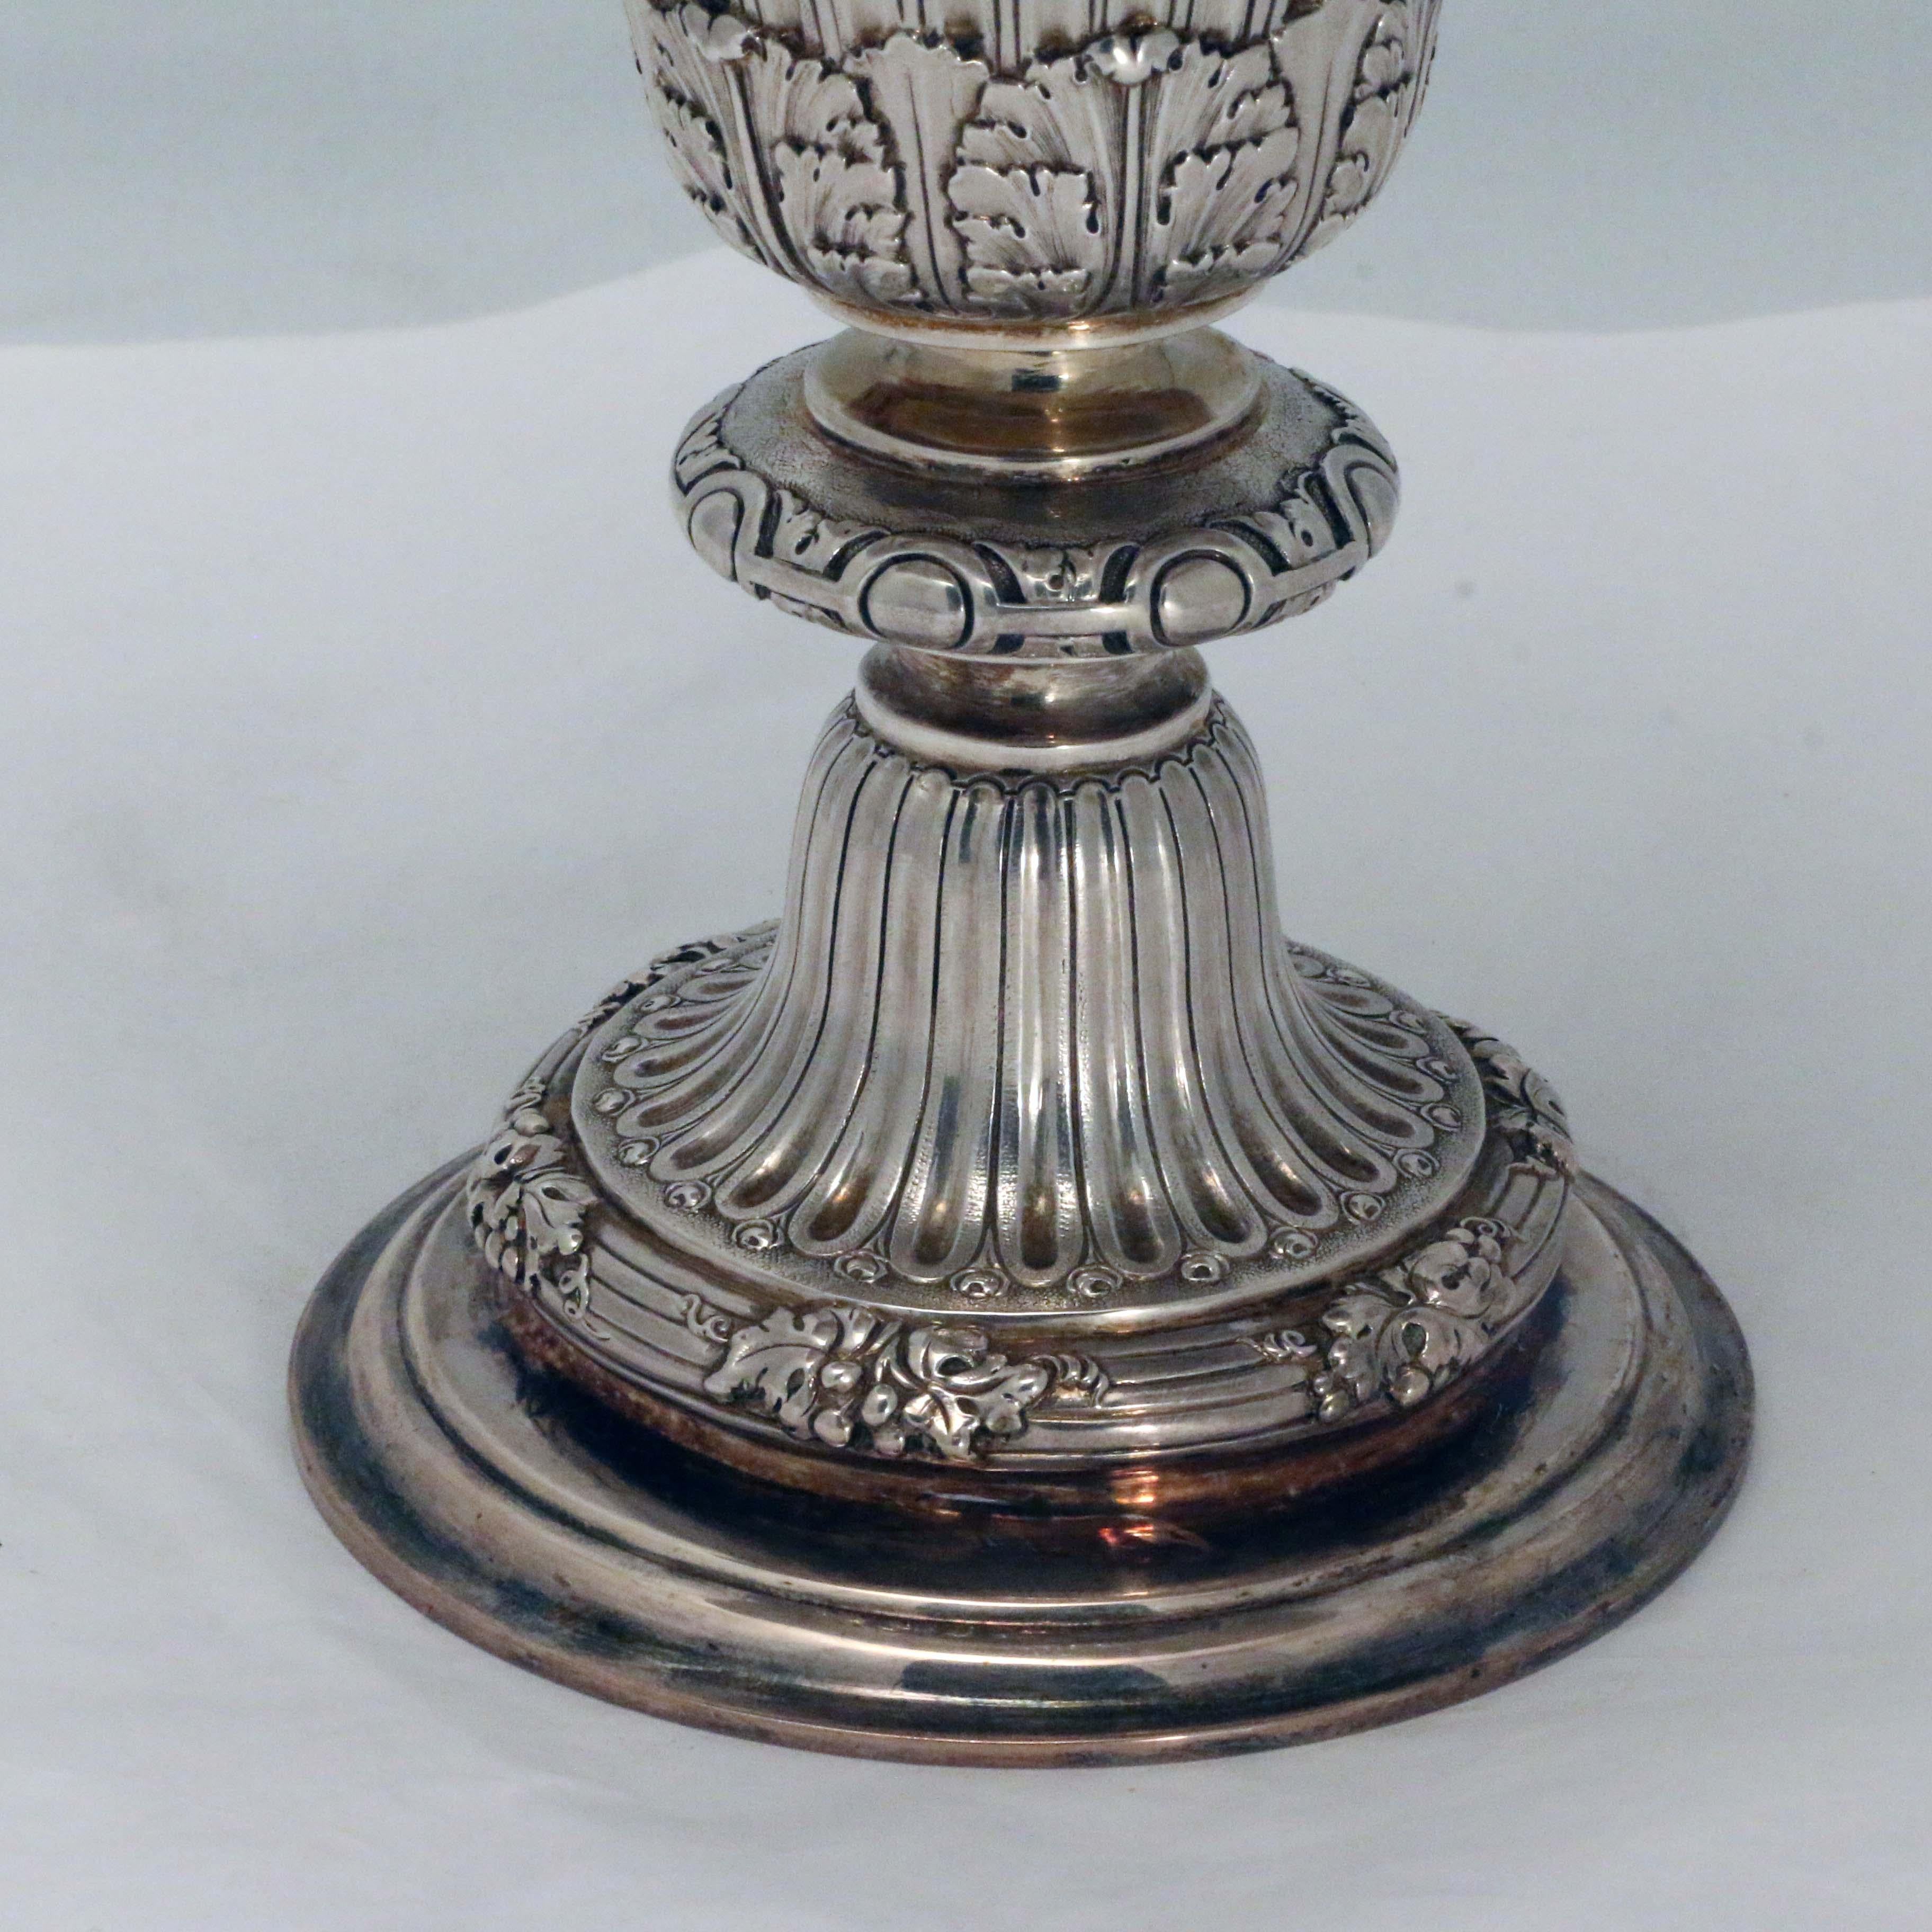 English William IV Hall Marked Silver Claret Jug by Benjamin Smith